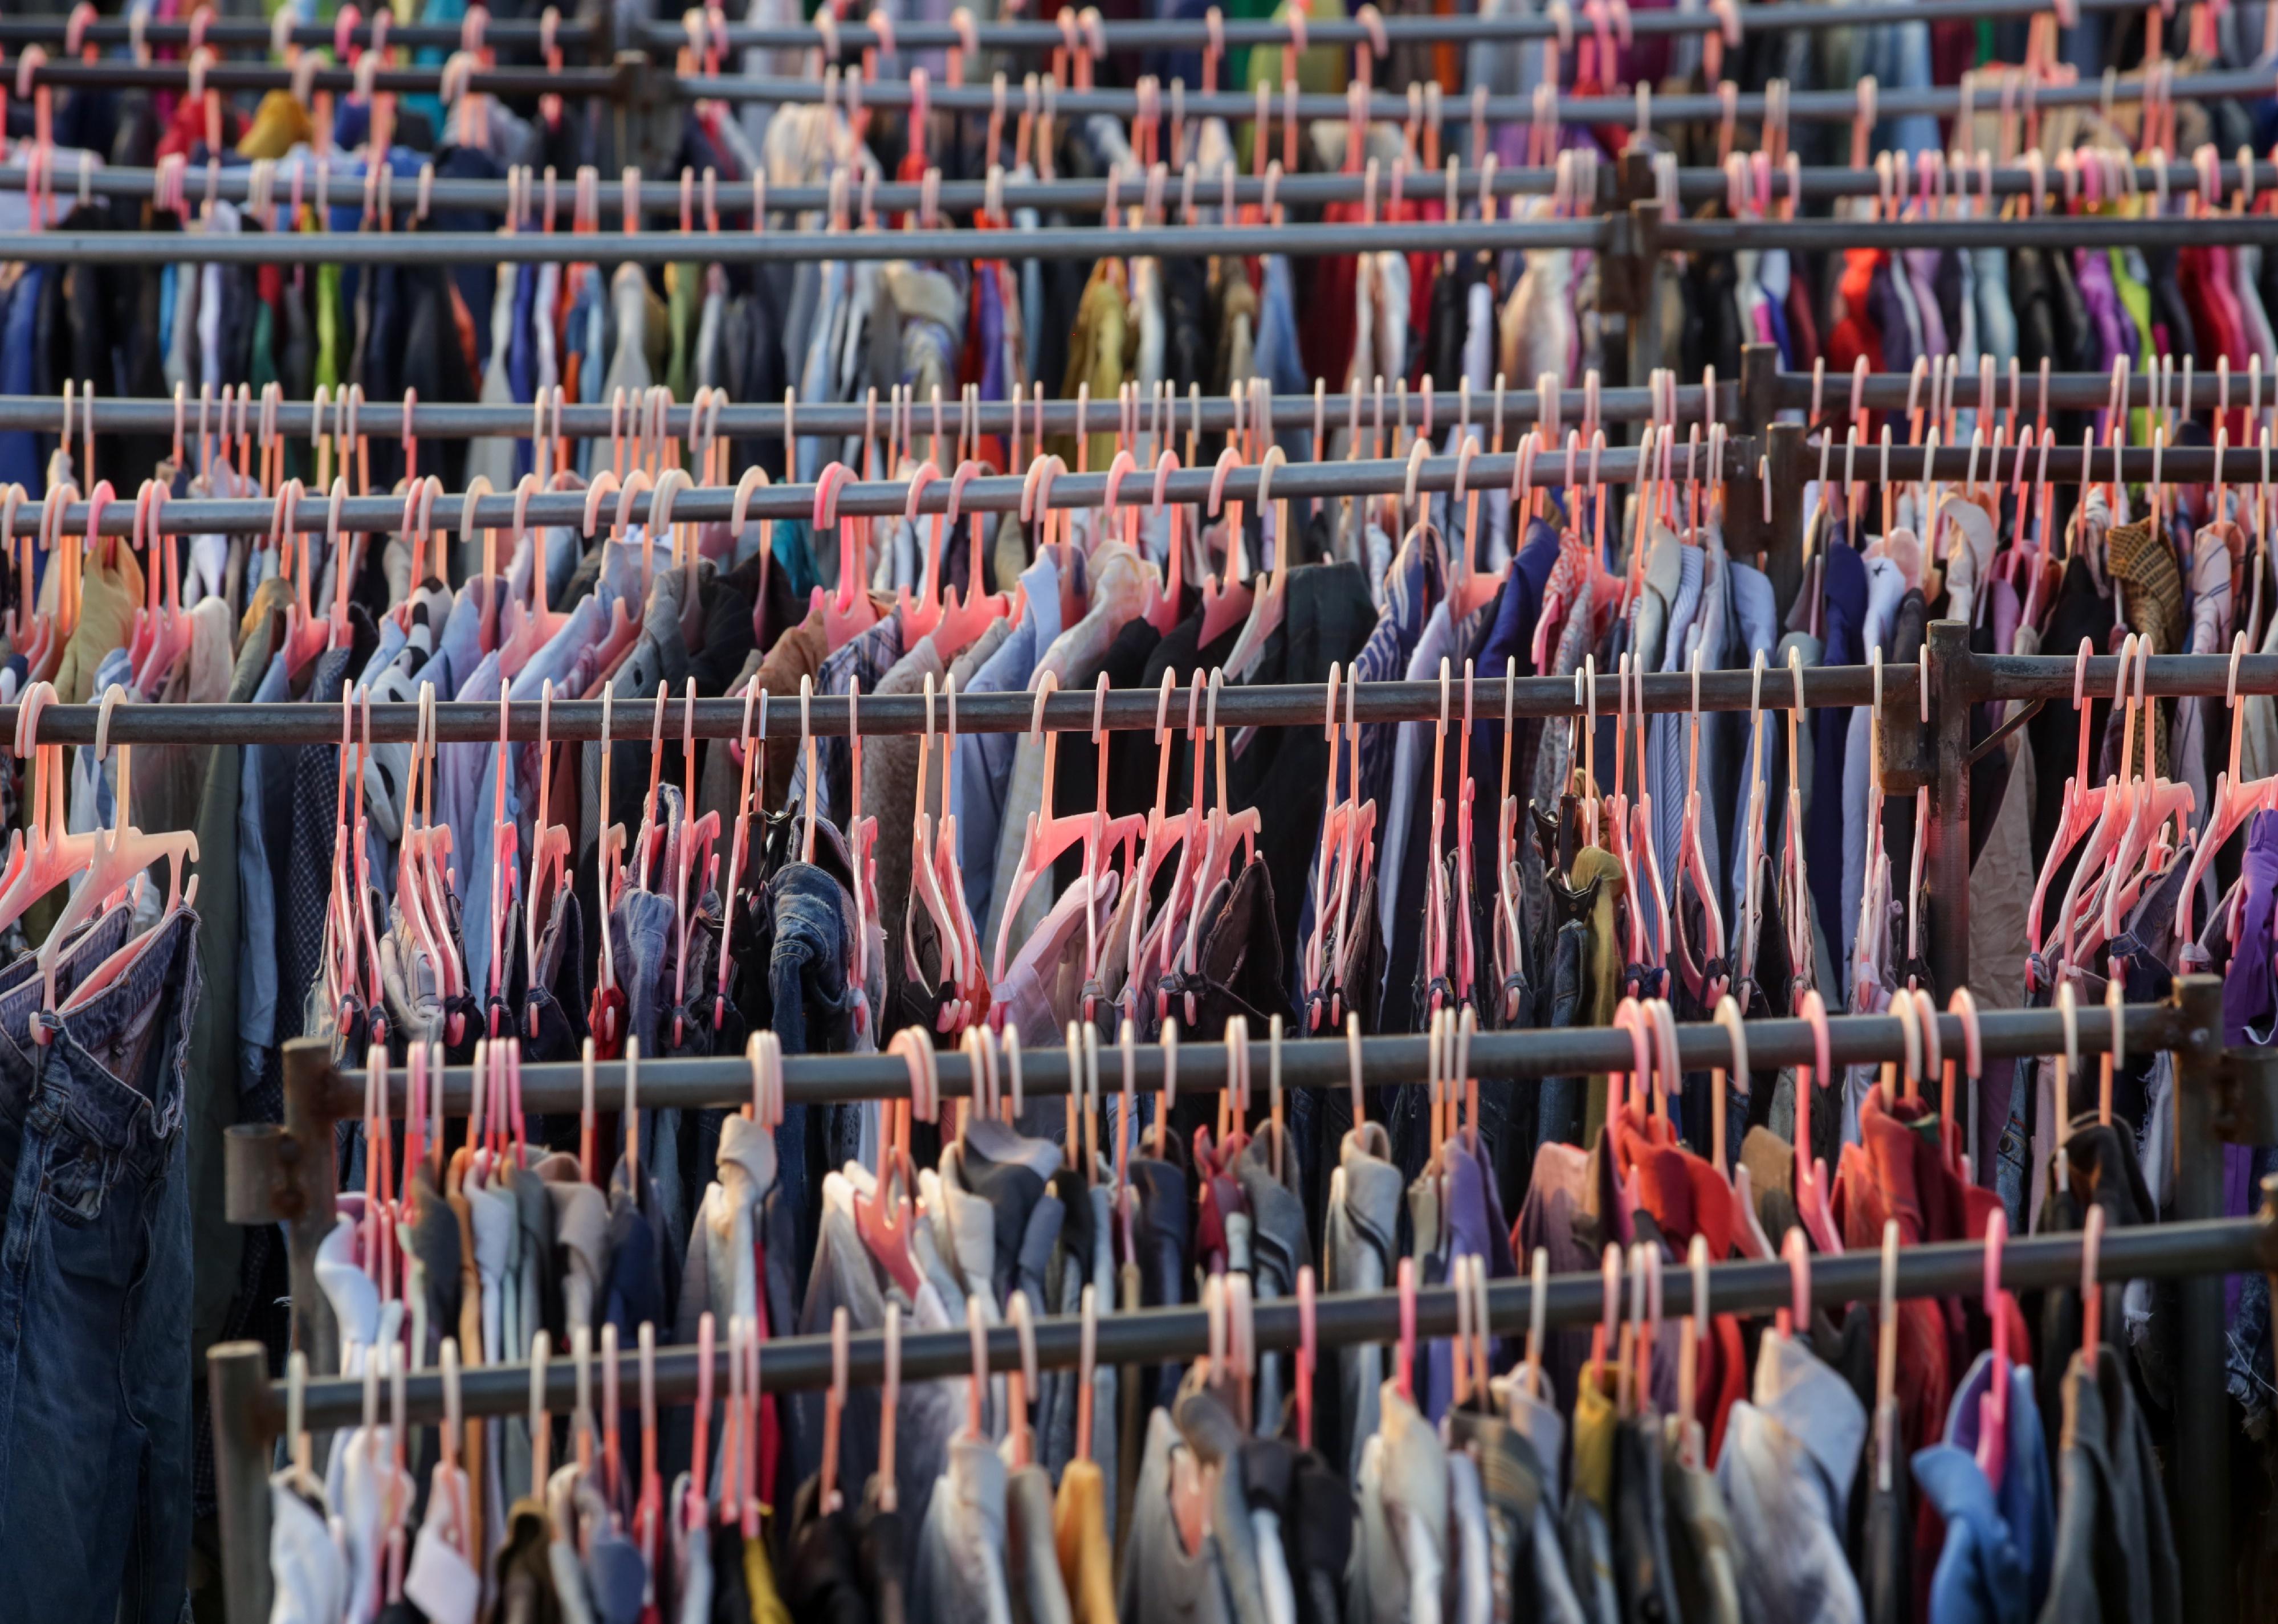 What’s the lifespan of textiles from production to landfill?